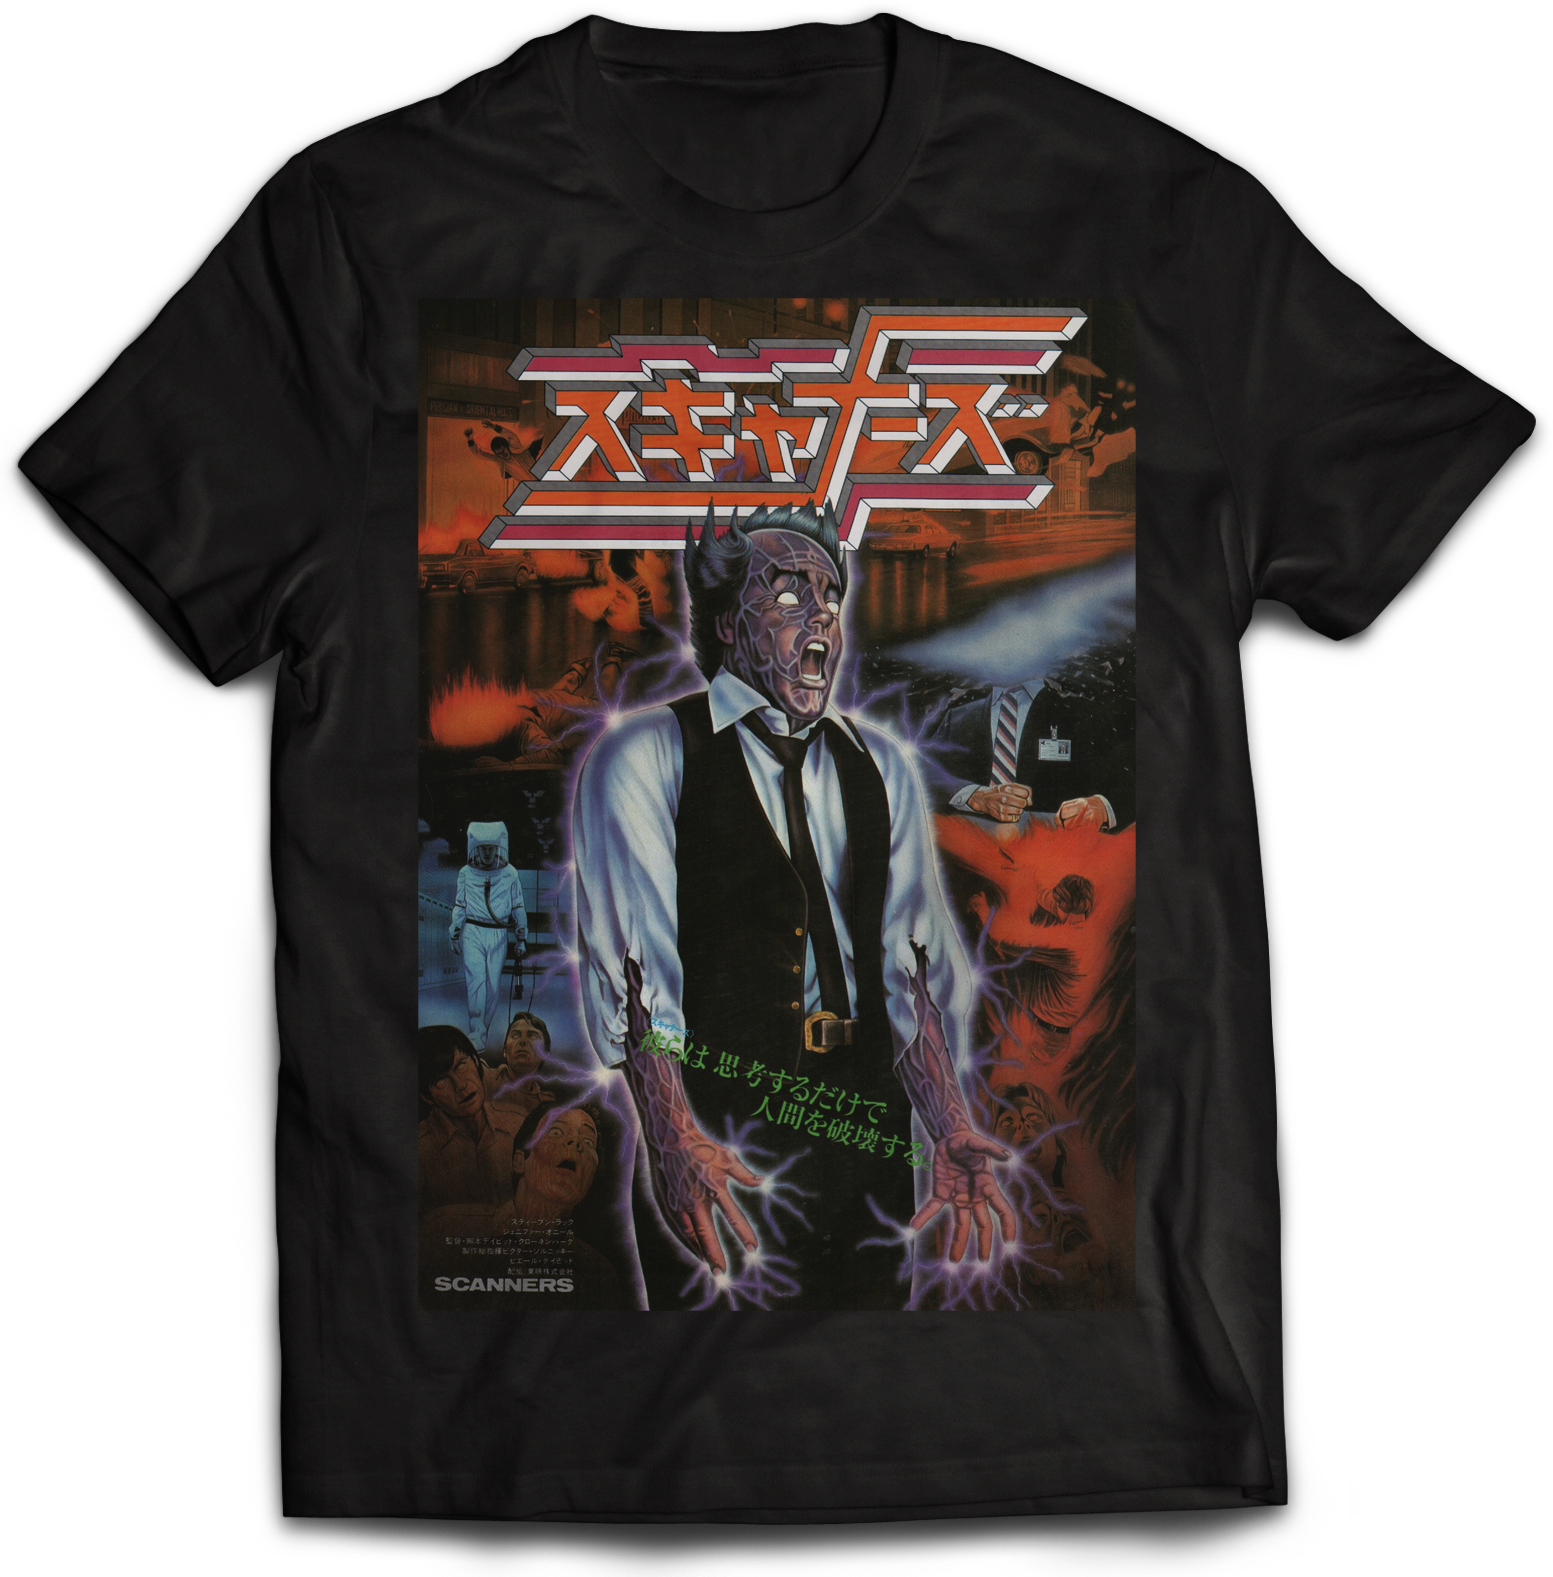 SCANNERS "JAPANESE POSTER" T-SHIRT